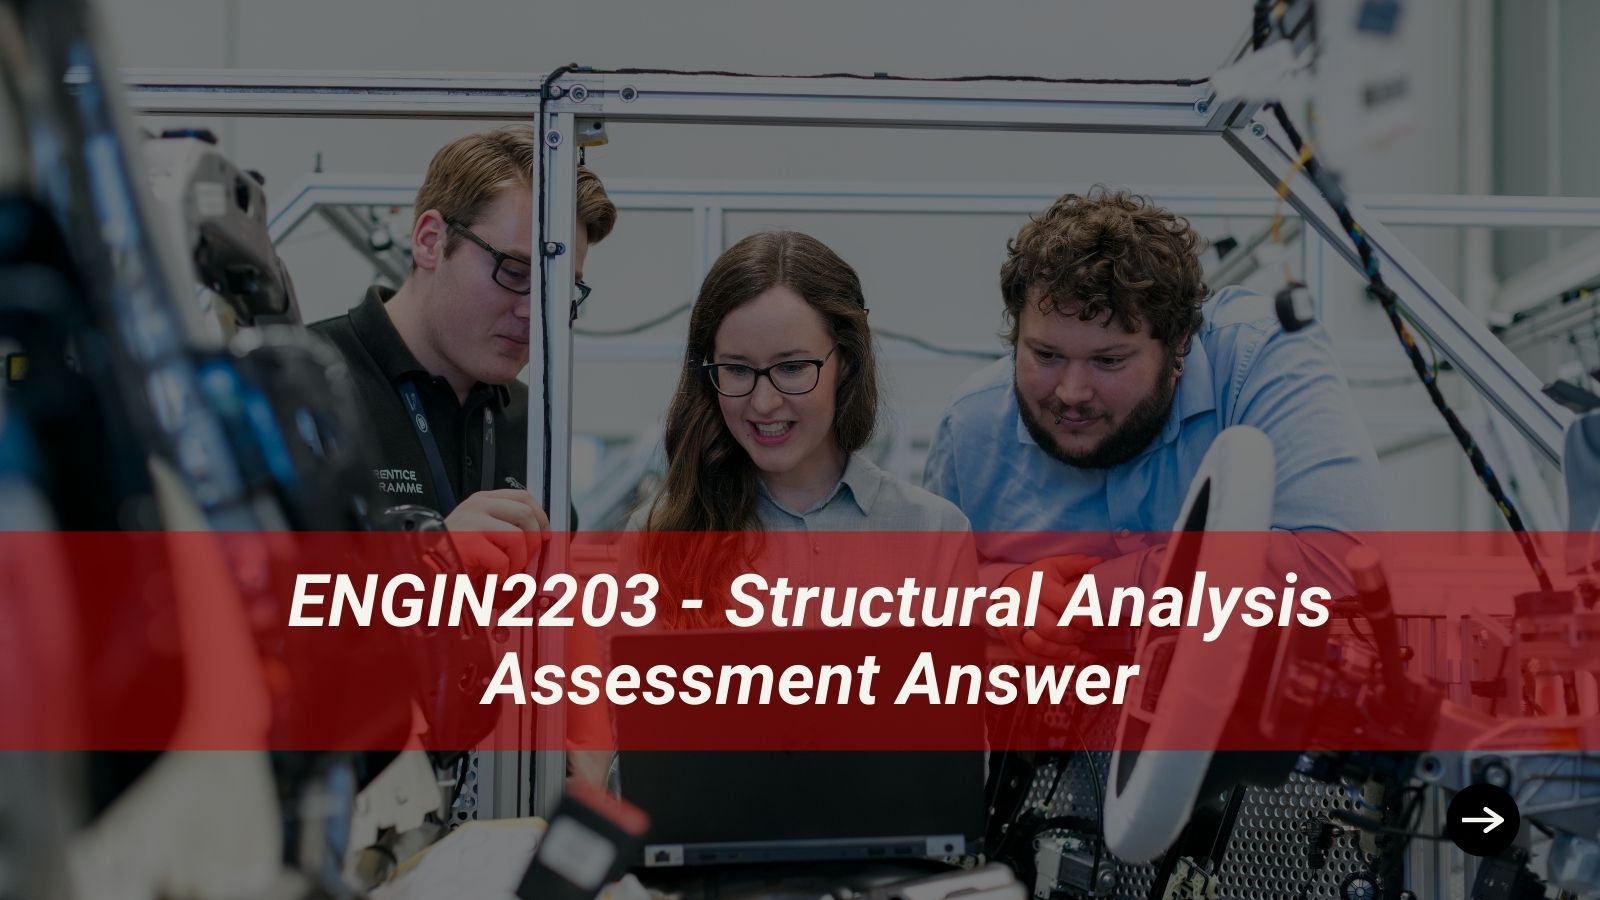 ENGIN2203 assessment answer